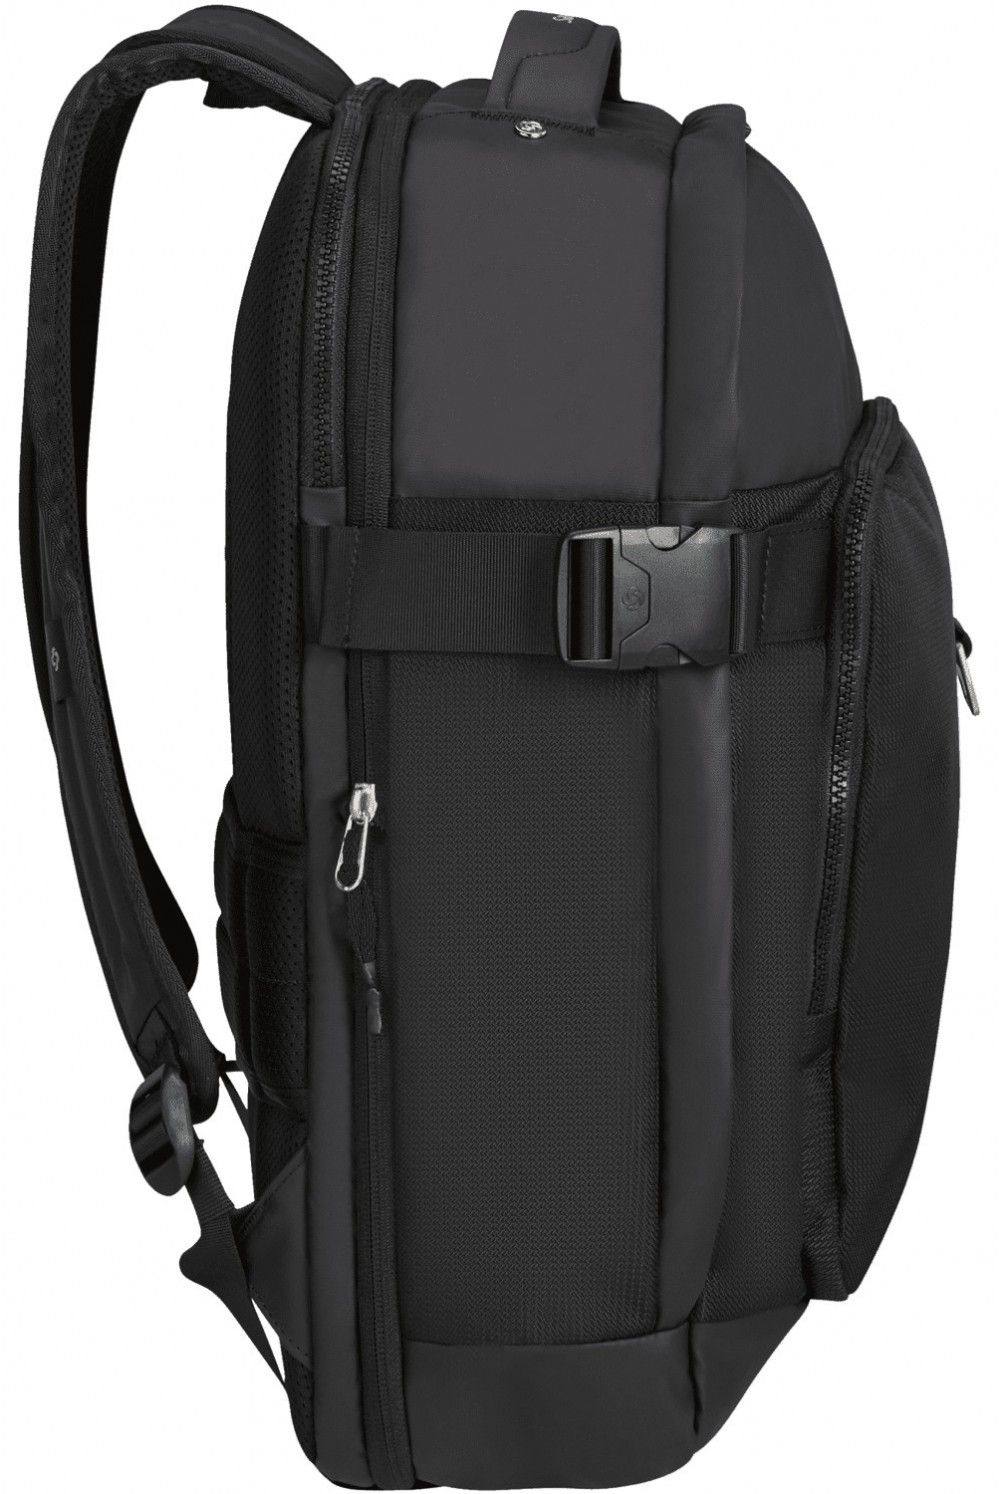 Samsonite laptop backpack Midtown 15.6 inches expandable